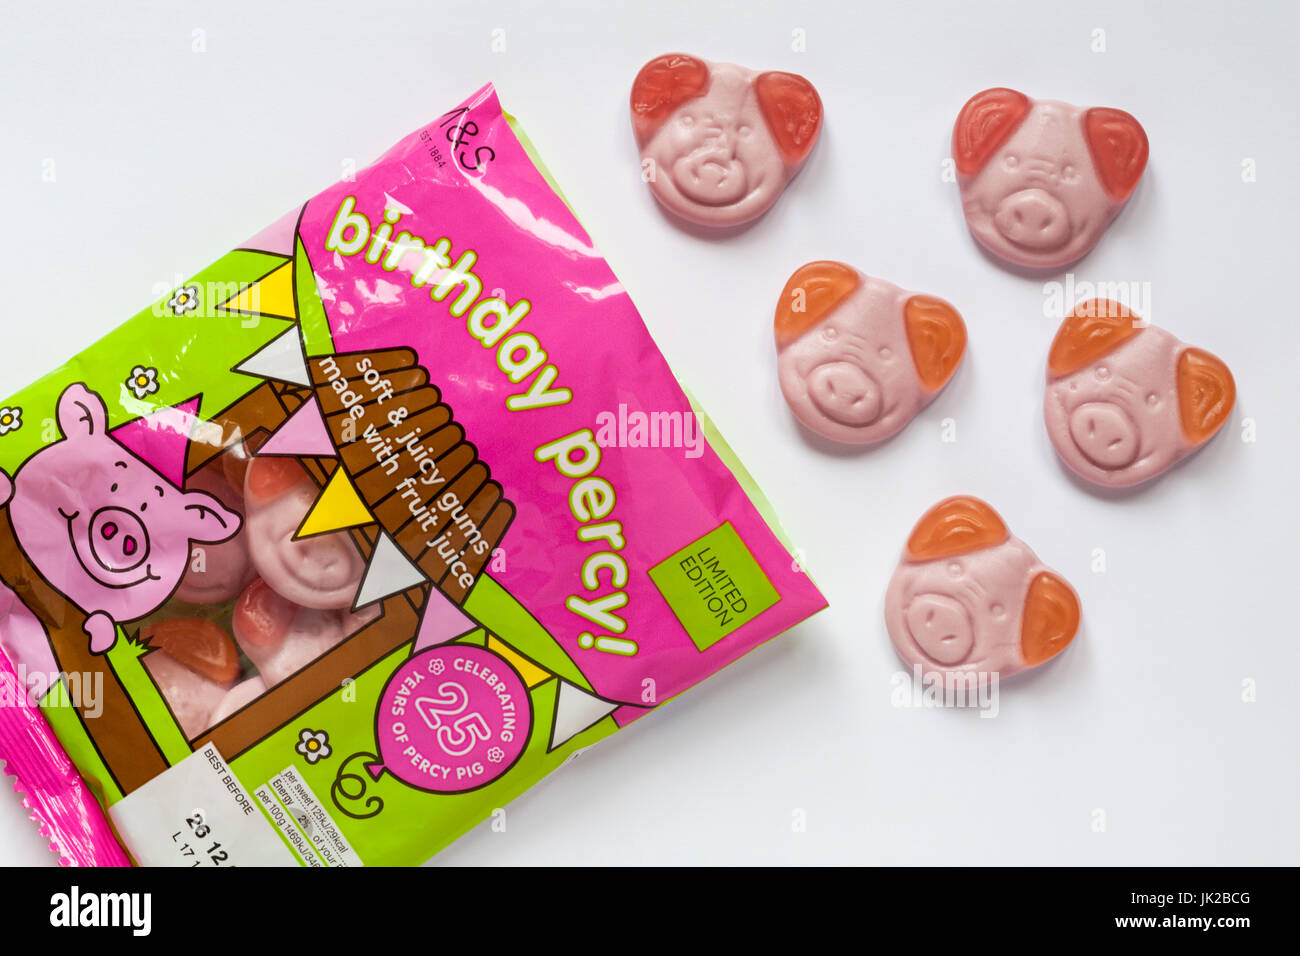 Bag of M&S birthday percy! percy pig sweets celebrating 25 years of Percy Pig opened to show contents set on white background Stock Photo